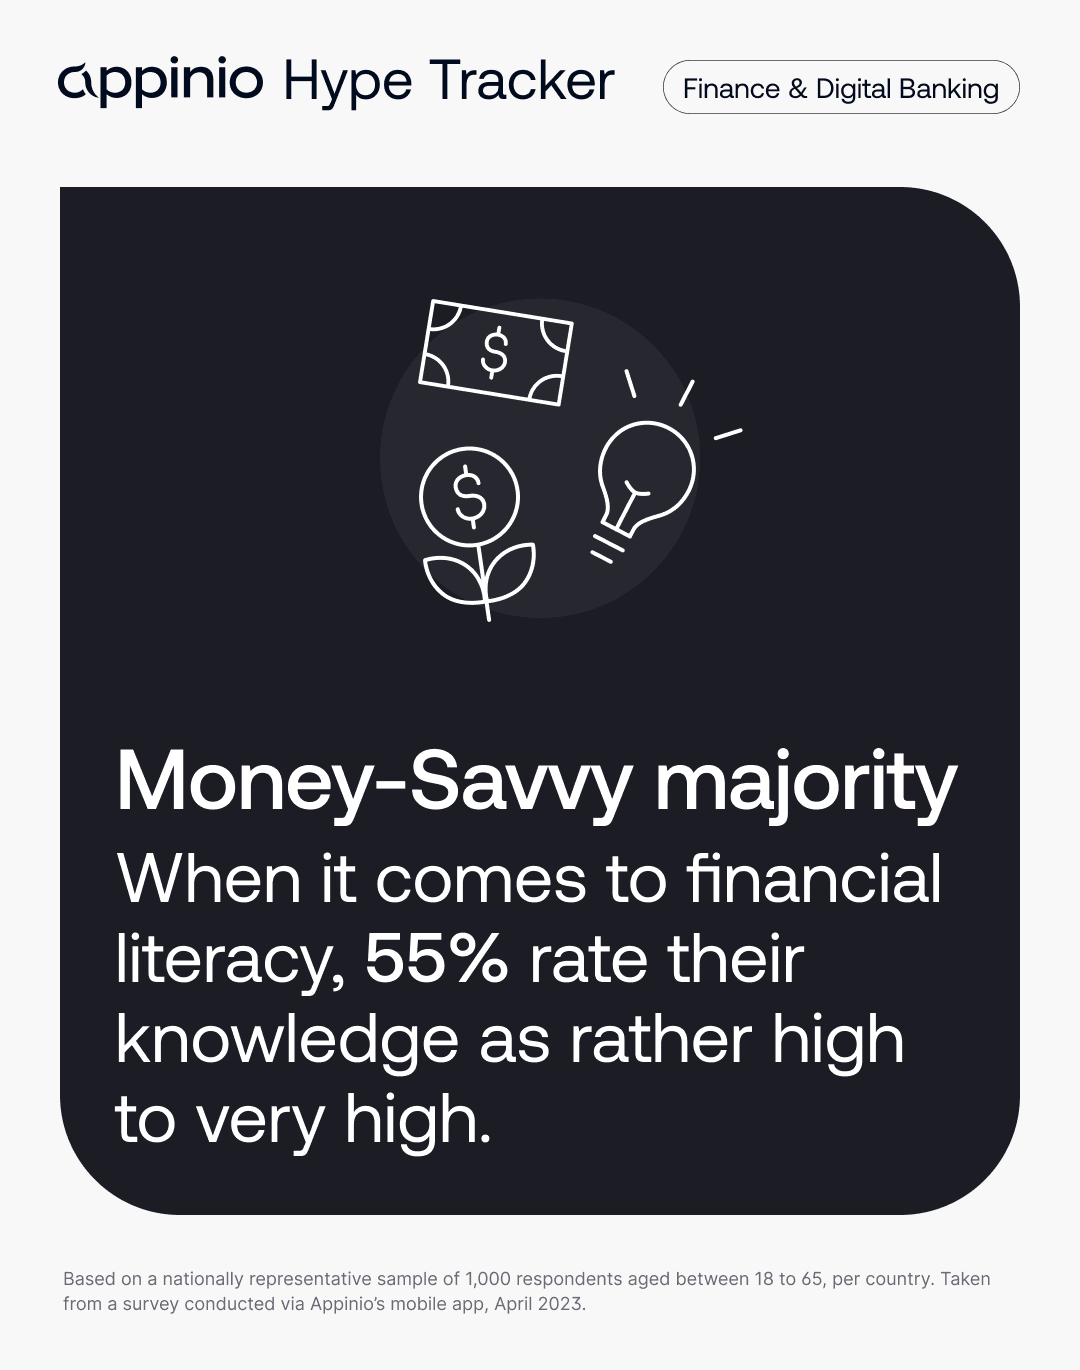 Americans consider themselves financially literate